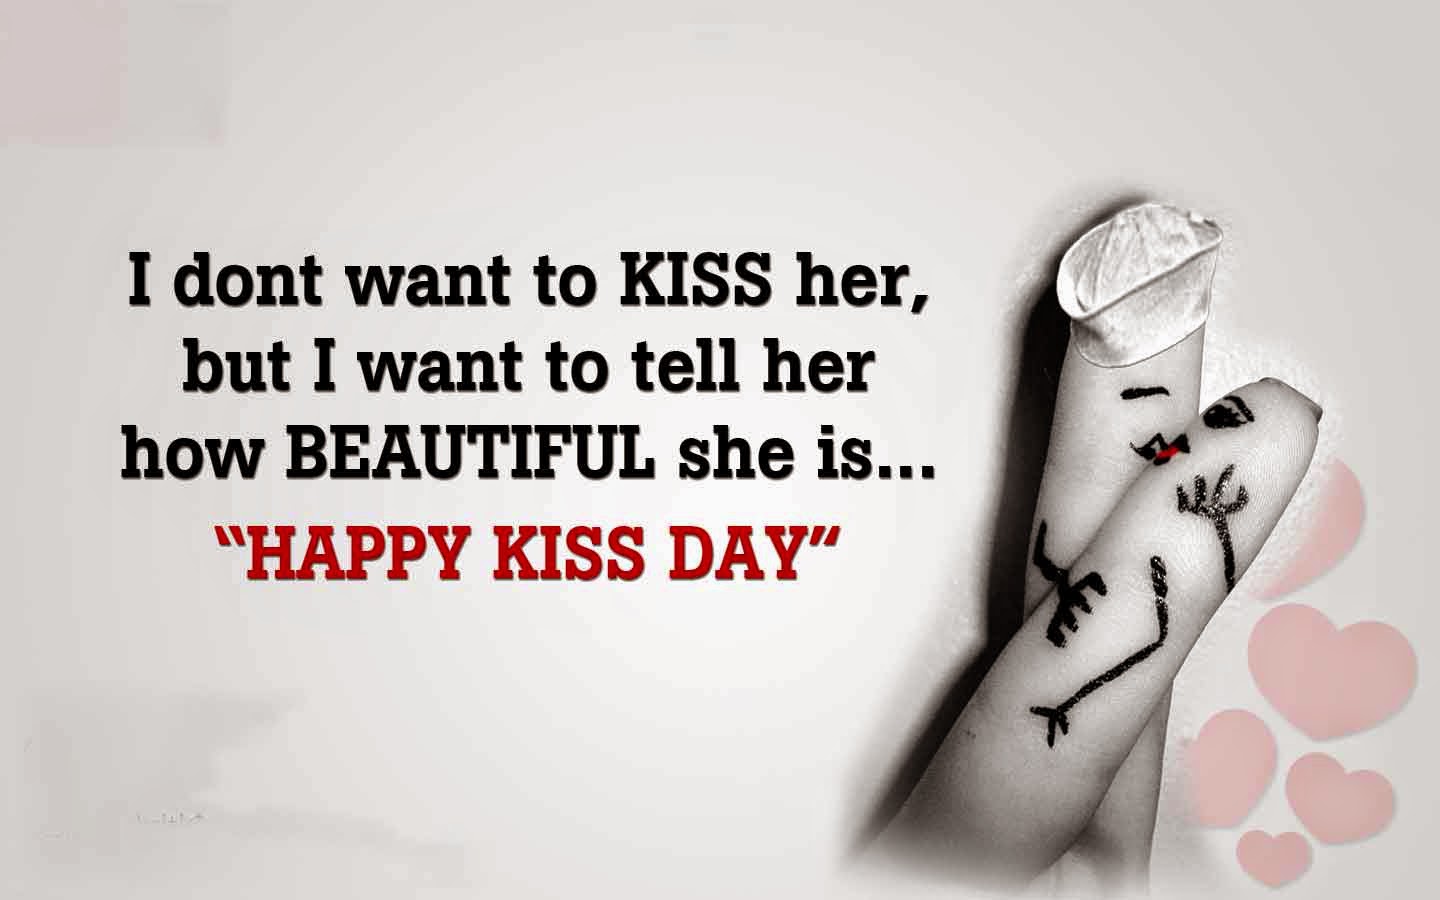 I don’t want to kiss her but i want to tell her how beautiful she is Happy Kiss Day